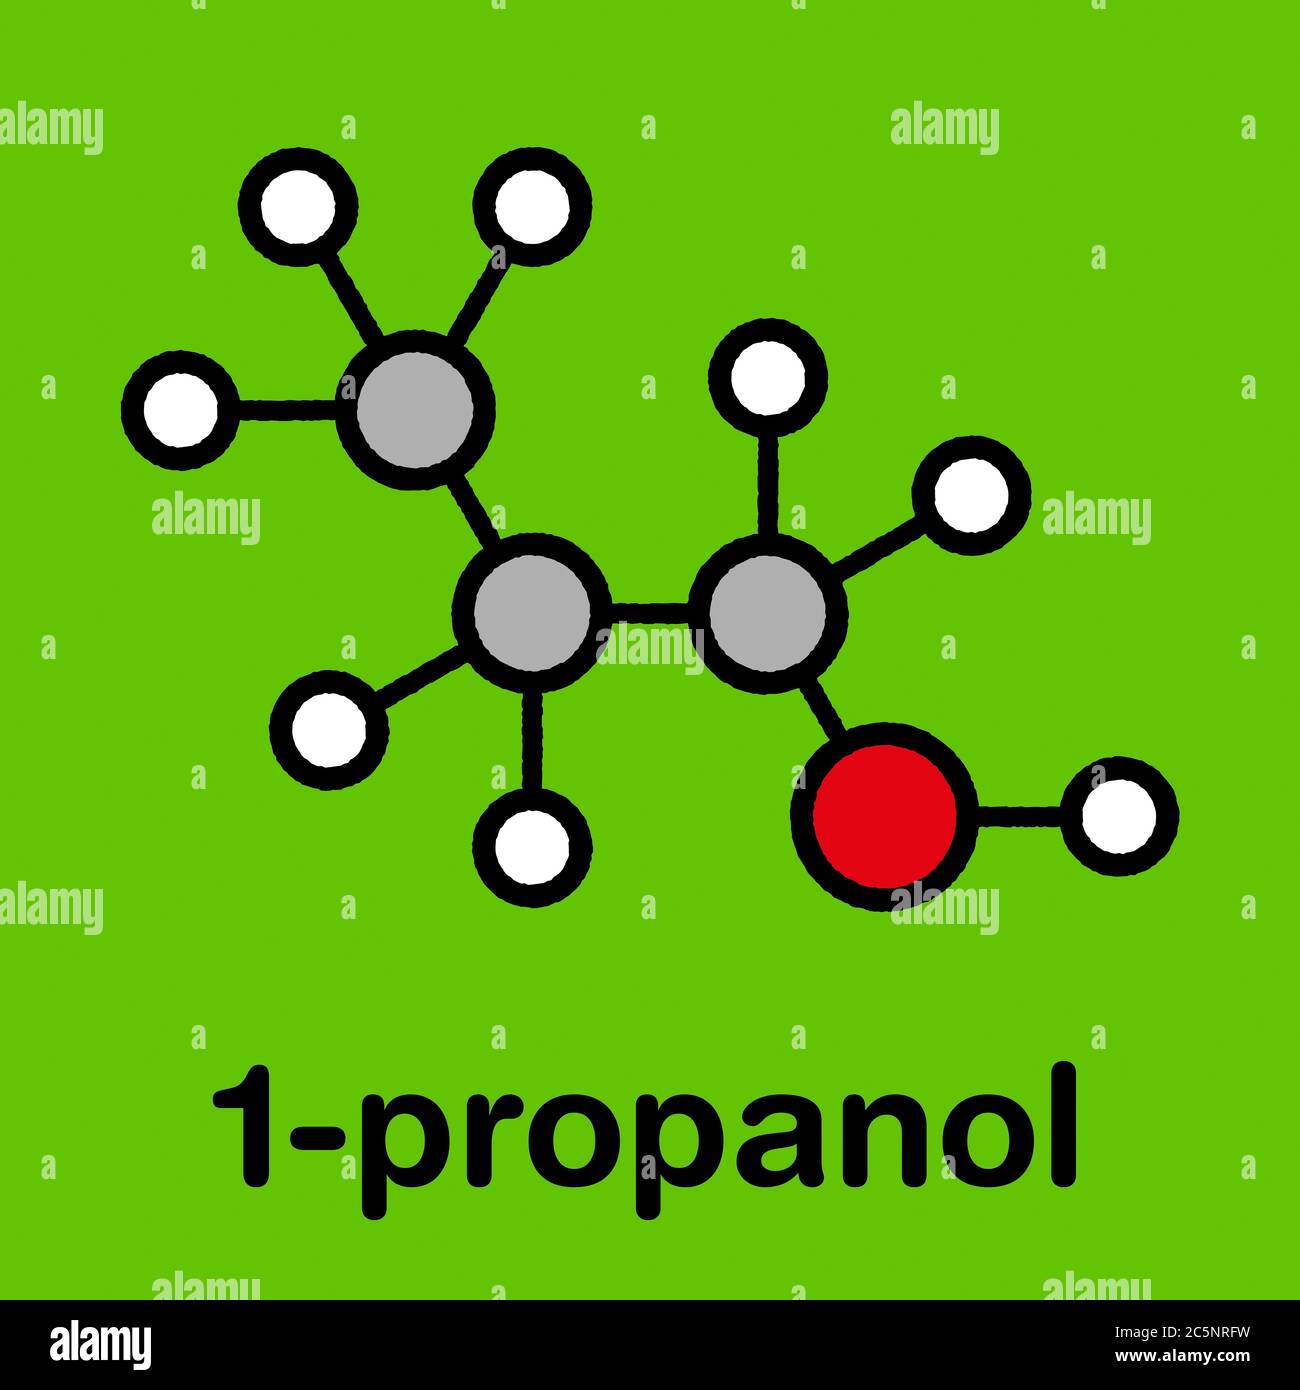 Propanol (n-propanol) solvent molecule. Stylized skeletal formula (chemical structure): Atoms are shown as color-coded circles: hydrogen (white), carbon (grey), oxygen (red). Stock Photo